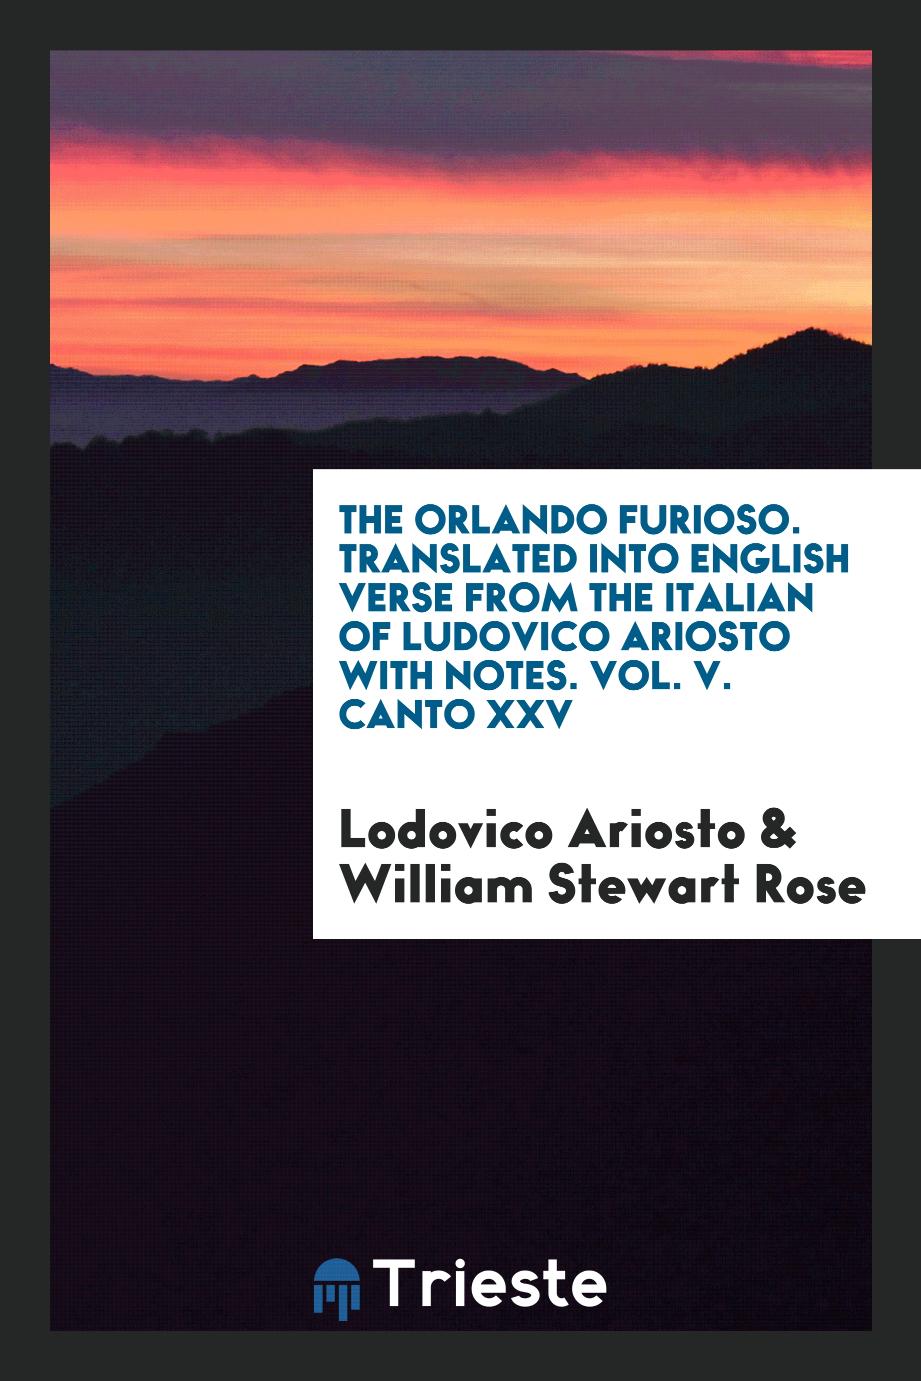 The Orlando Furioso. Translated into English Verse from the Italian of Ludovico Ariosto with Notes. Vol. V. Canto XXV